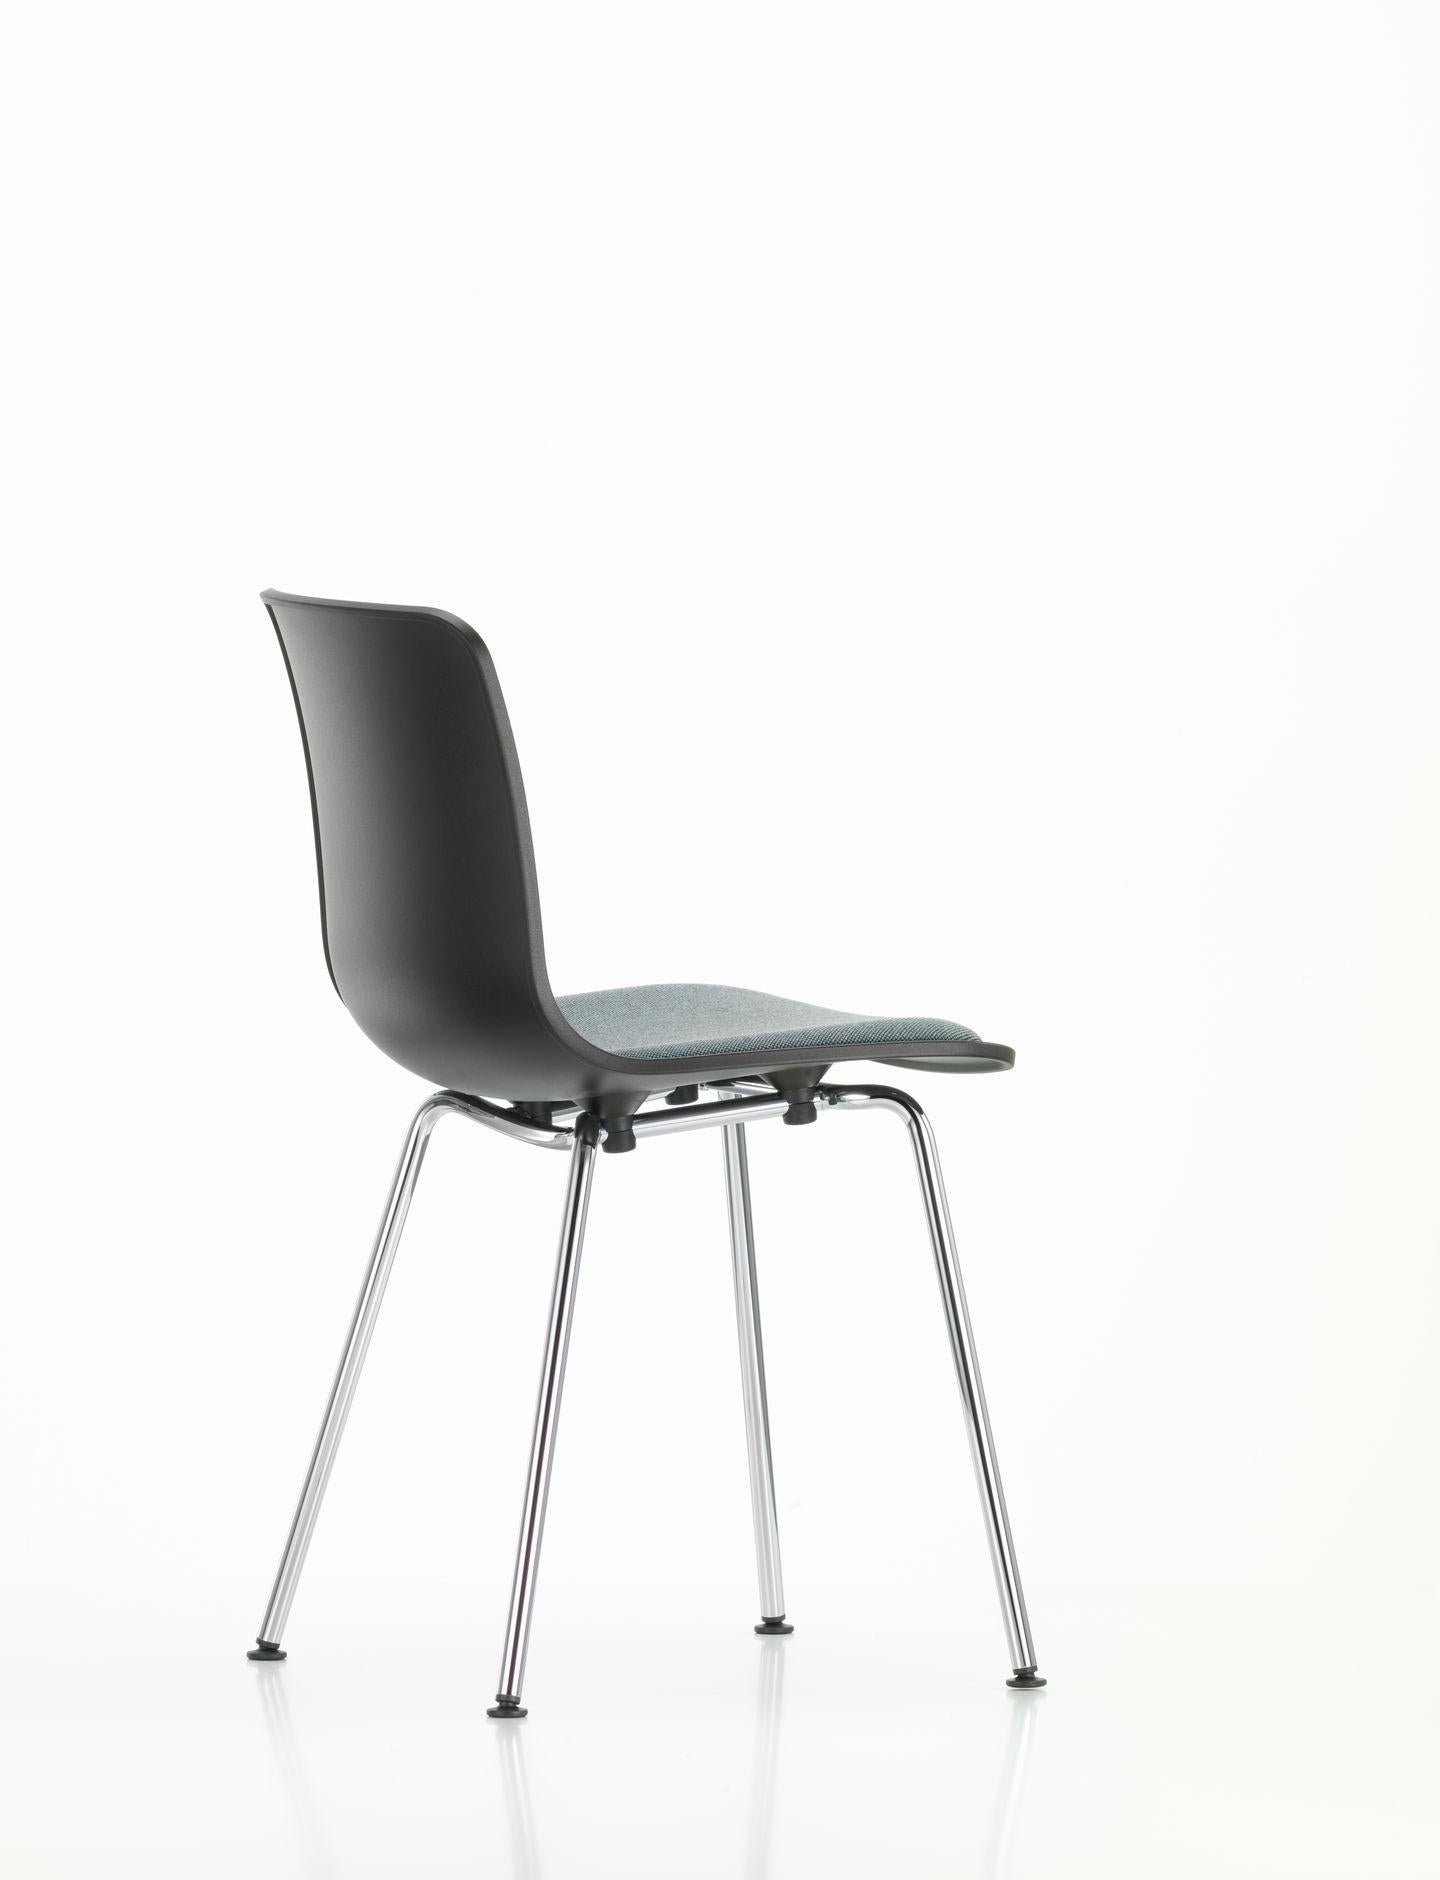 Swiss Jasper Morrison HAL Tube Chair with Seat Upholstery by Vitra